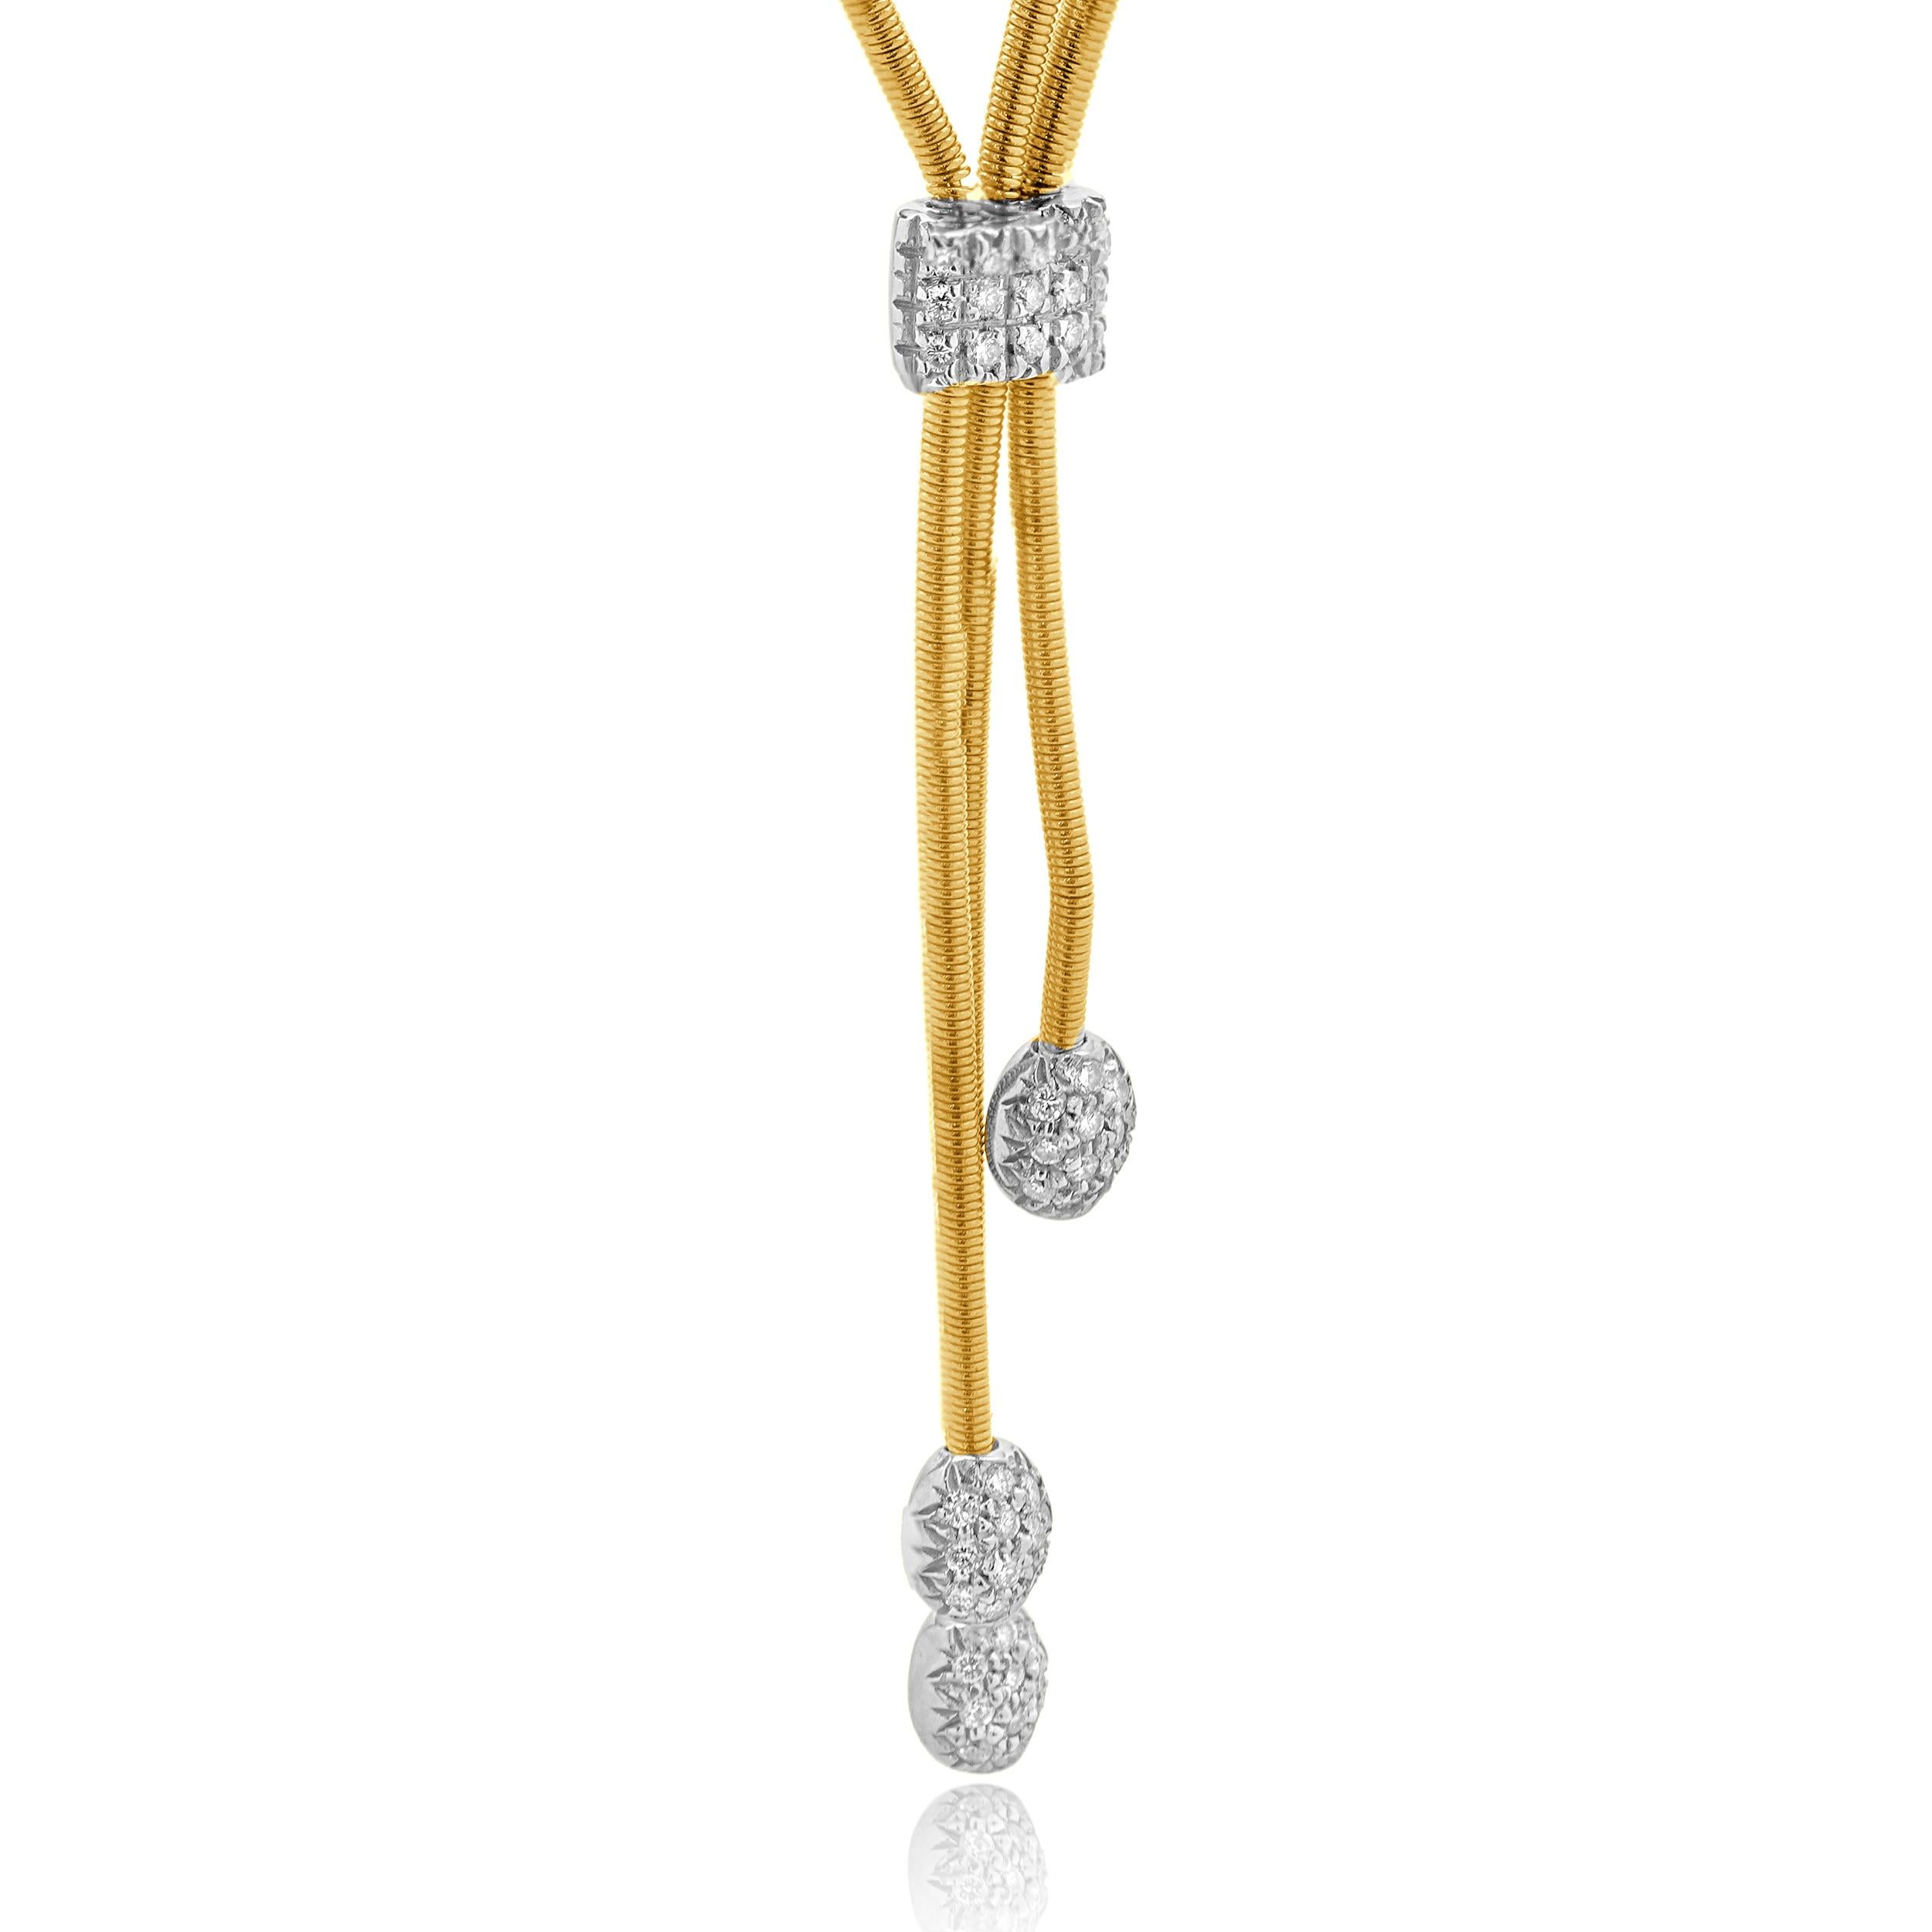 Designer: Marco Bicego
Material: 18K yellow & white gold
Diamond: round brilliant cut = 0.25cttw
Color: H
Clarity: VS2
Weight: 17.01 grams
Dimensions: necklace measures 16.25-inches
